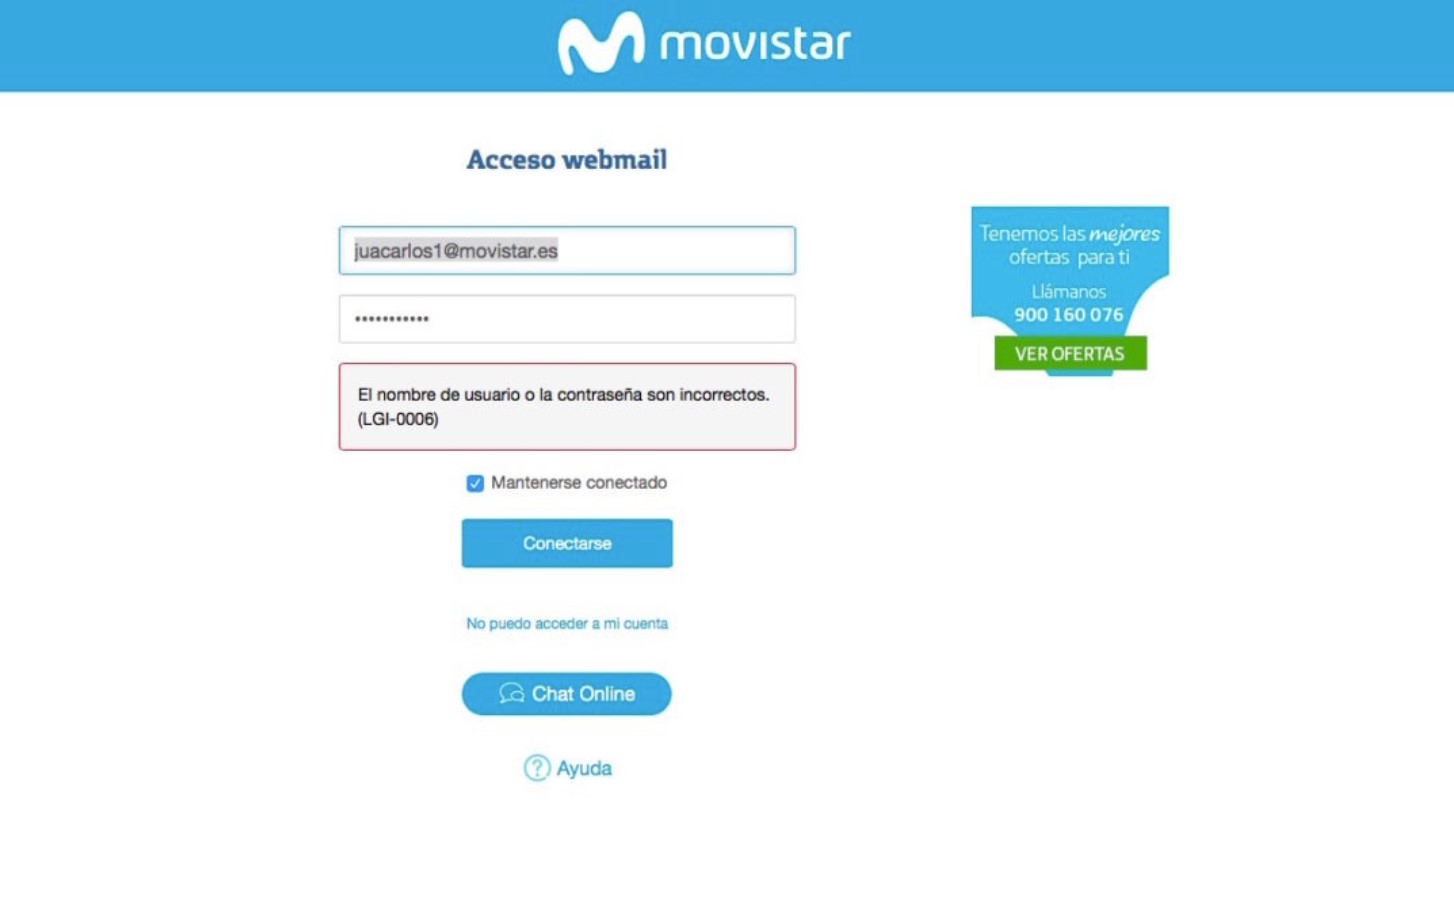 MOVISTAR EMAIL: THIS IS HOW YOU CAN ENTER YOUR ACCOUNT FROM THE WEB